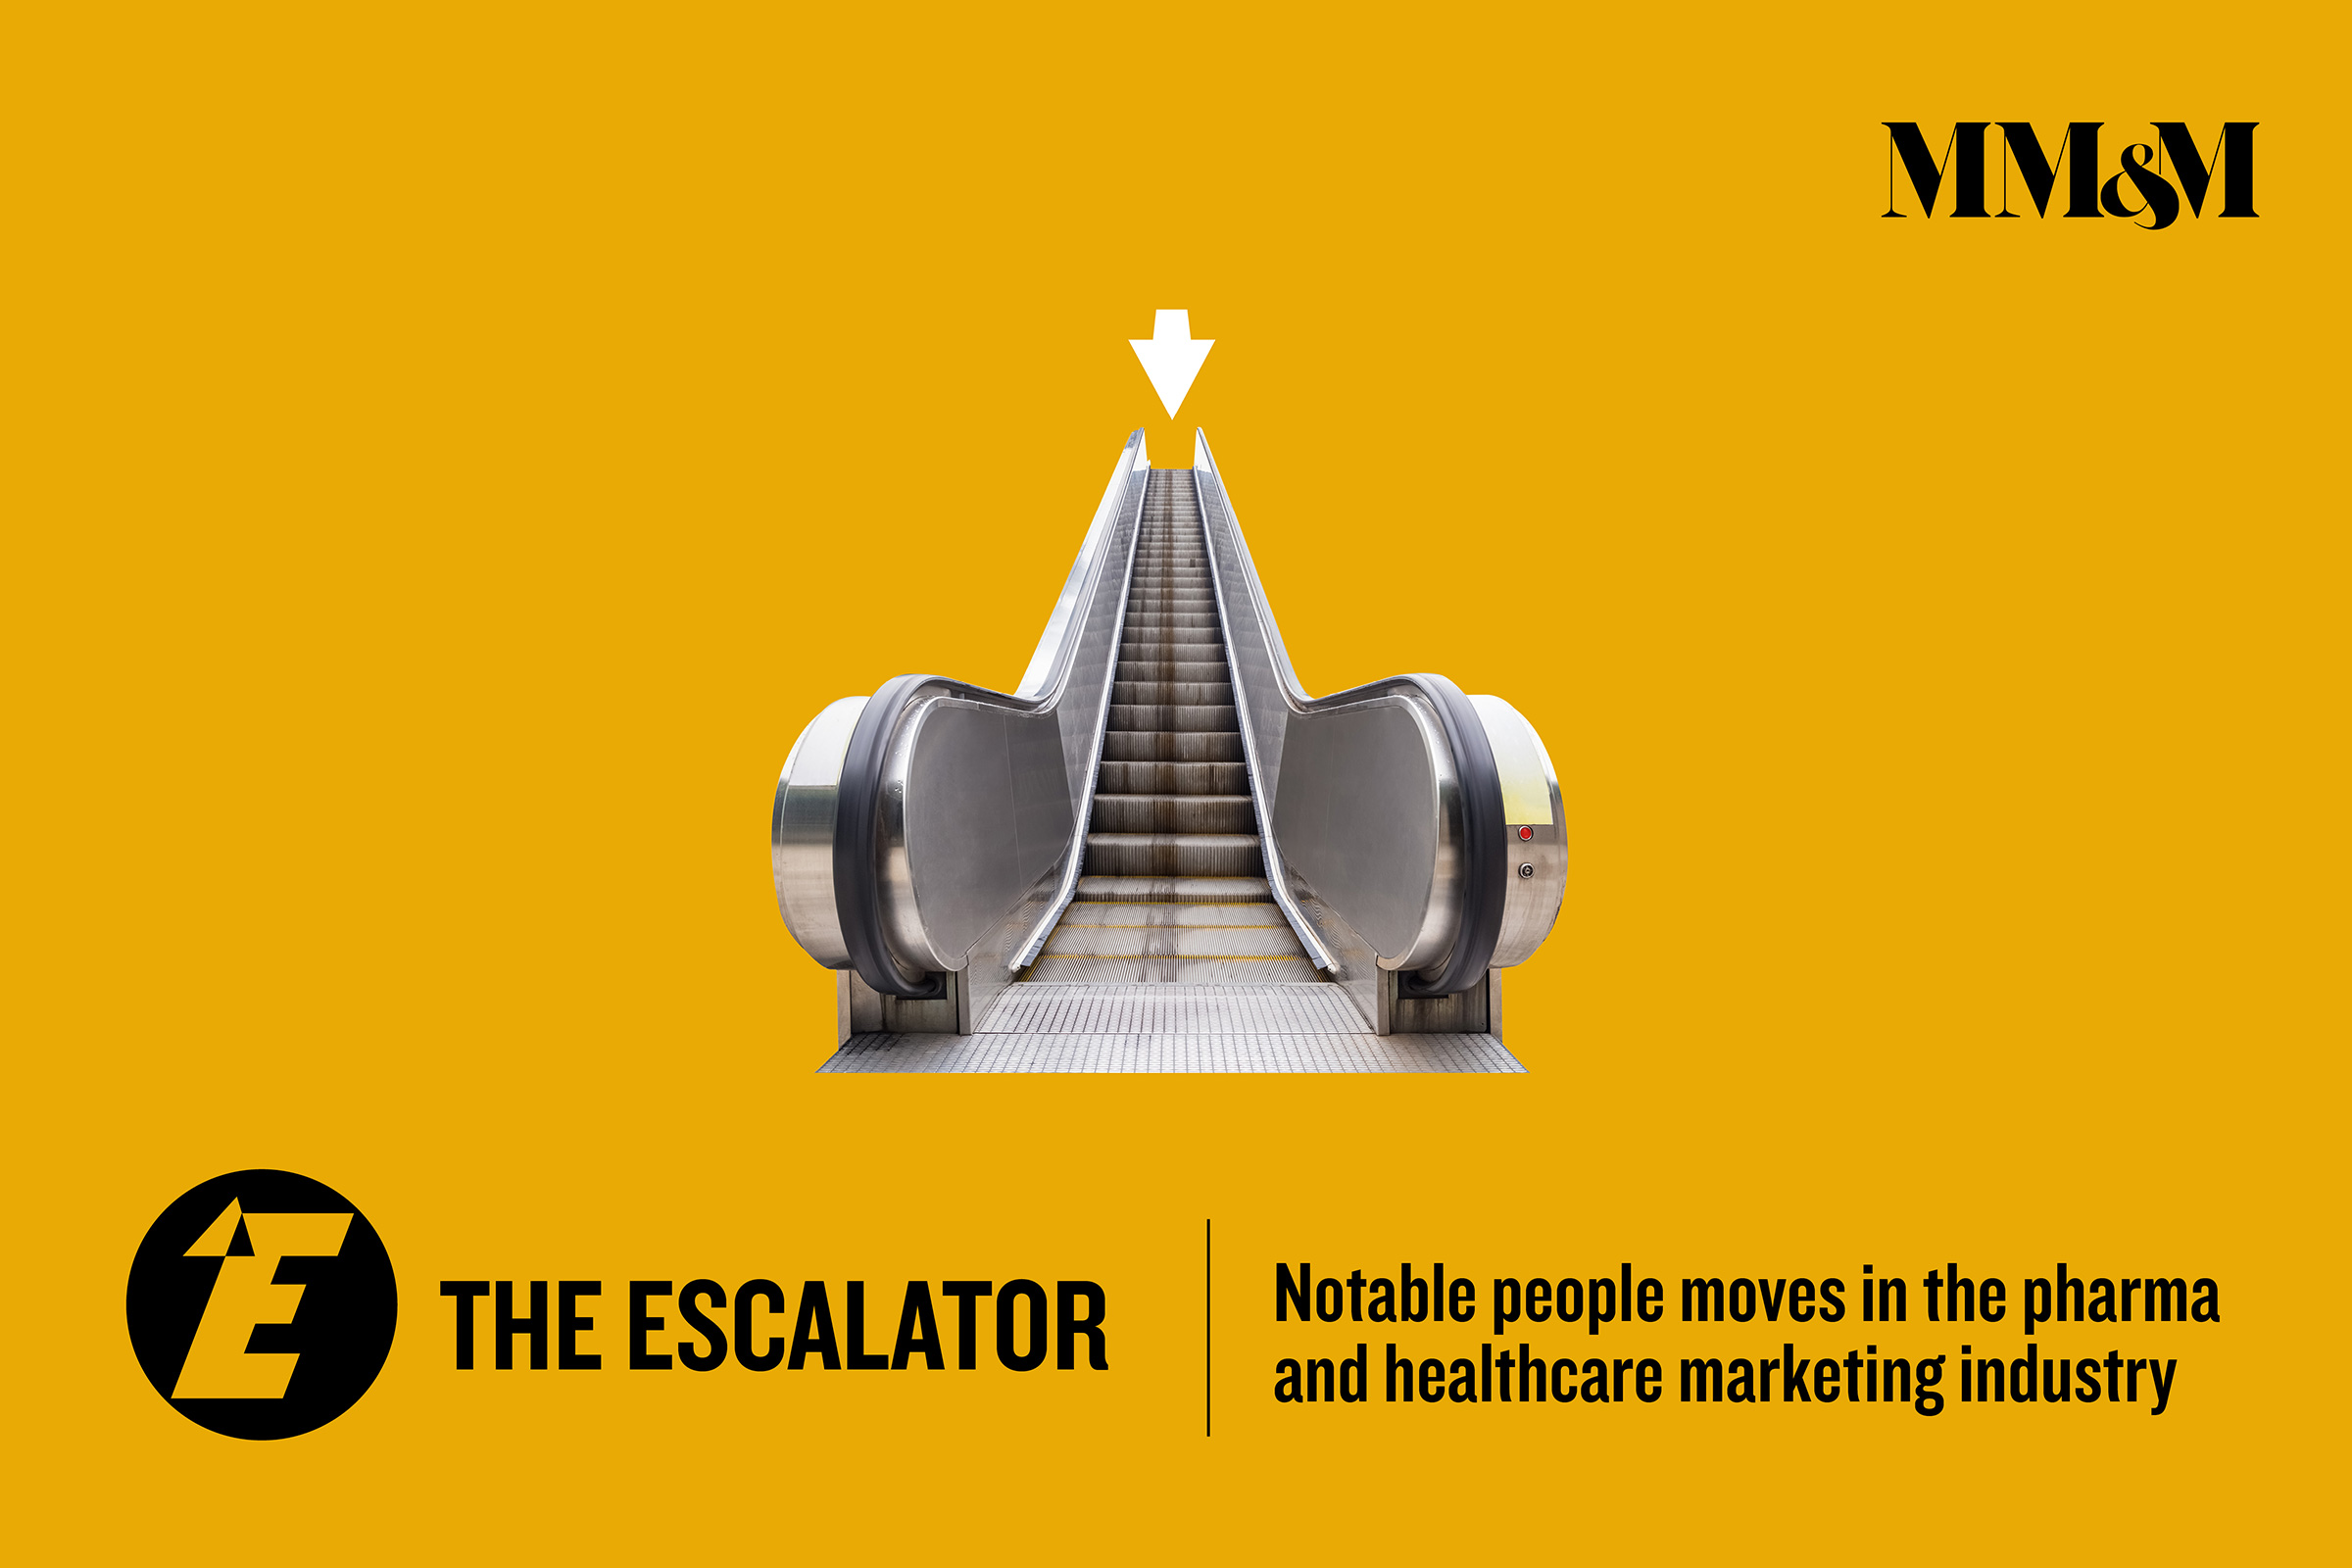 The Escalator: Genentech executive to join Gilead as chief medical officer